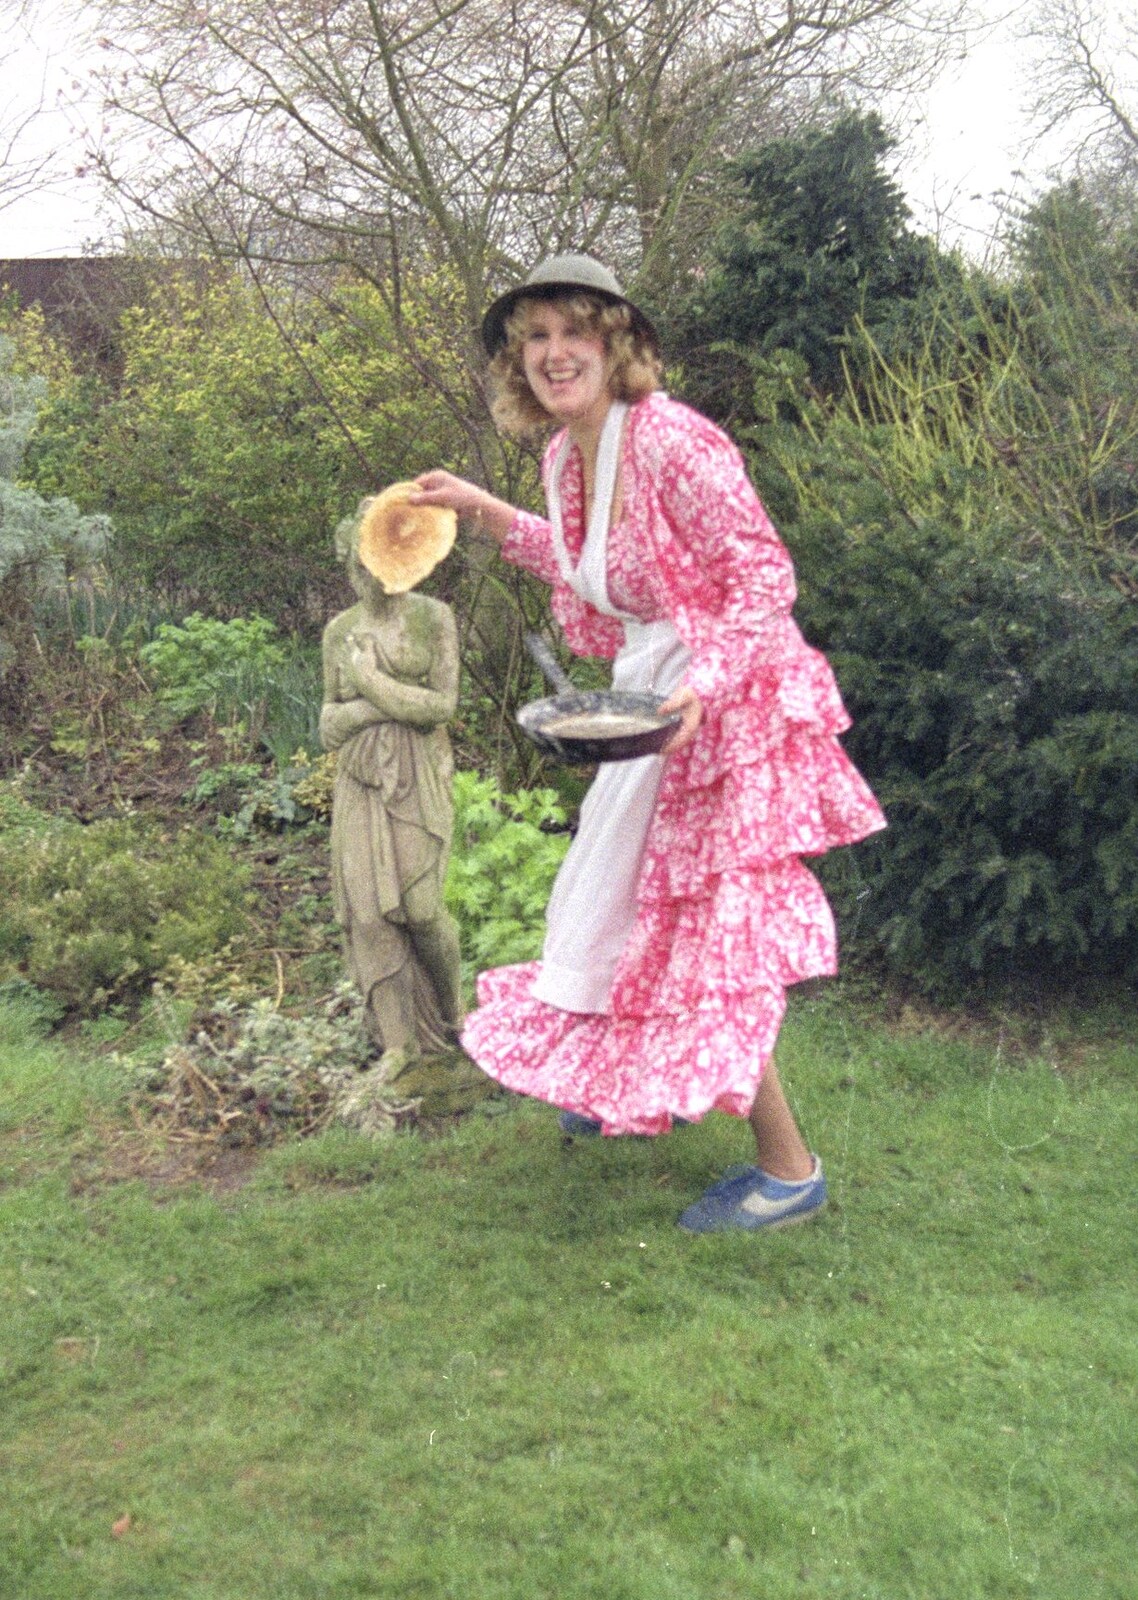 Elteb gets some practice in in the garden from Pancake Day in Starston, Norfolk - 27th February 1990